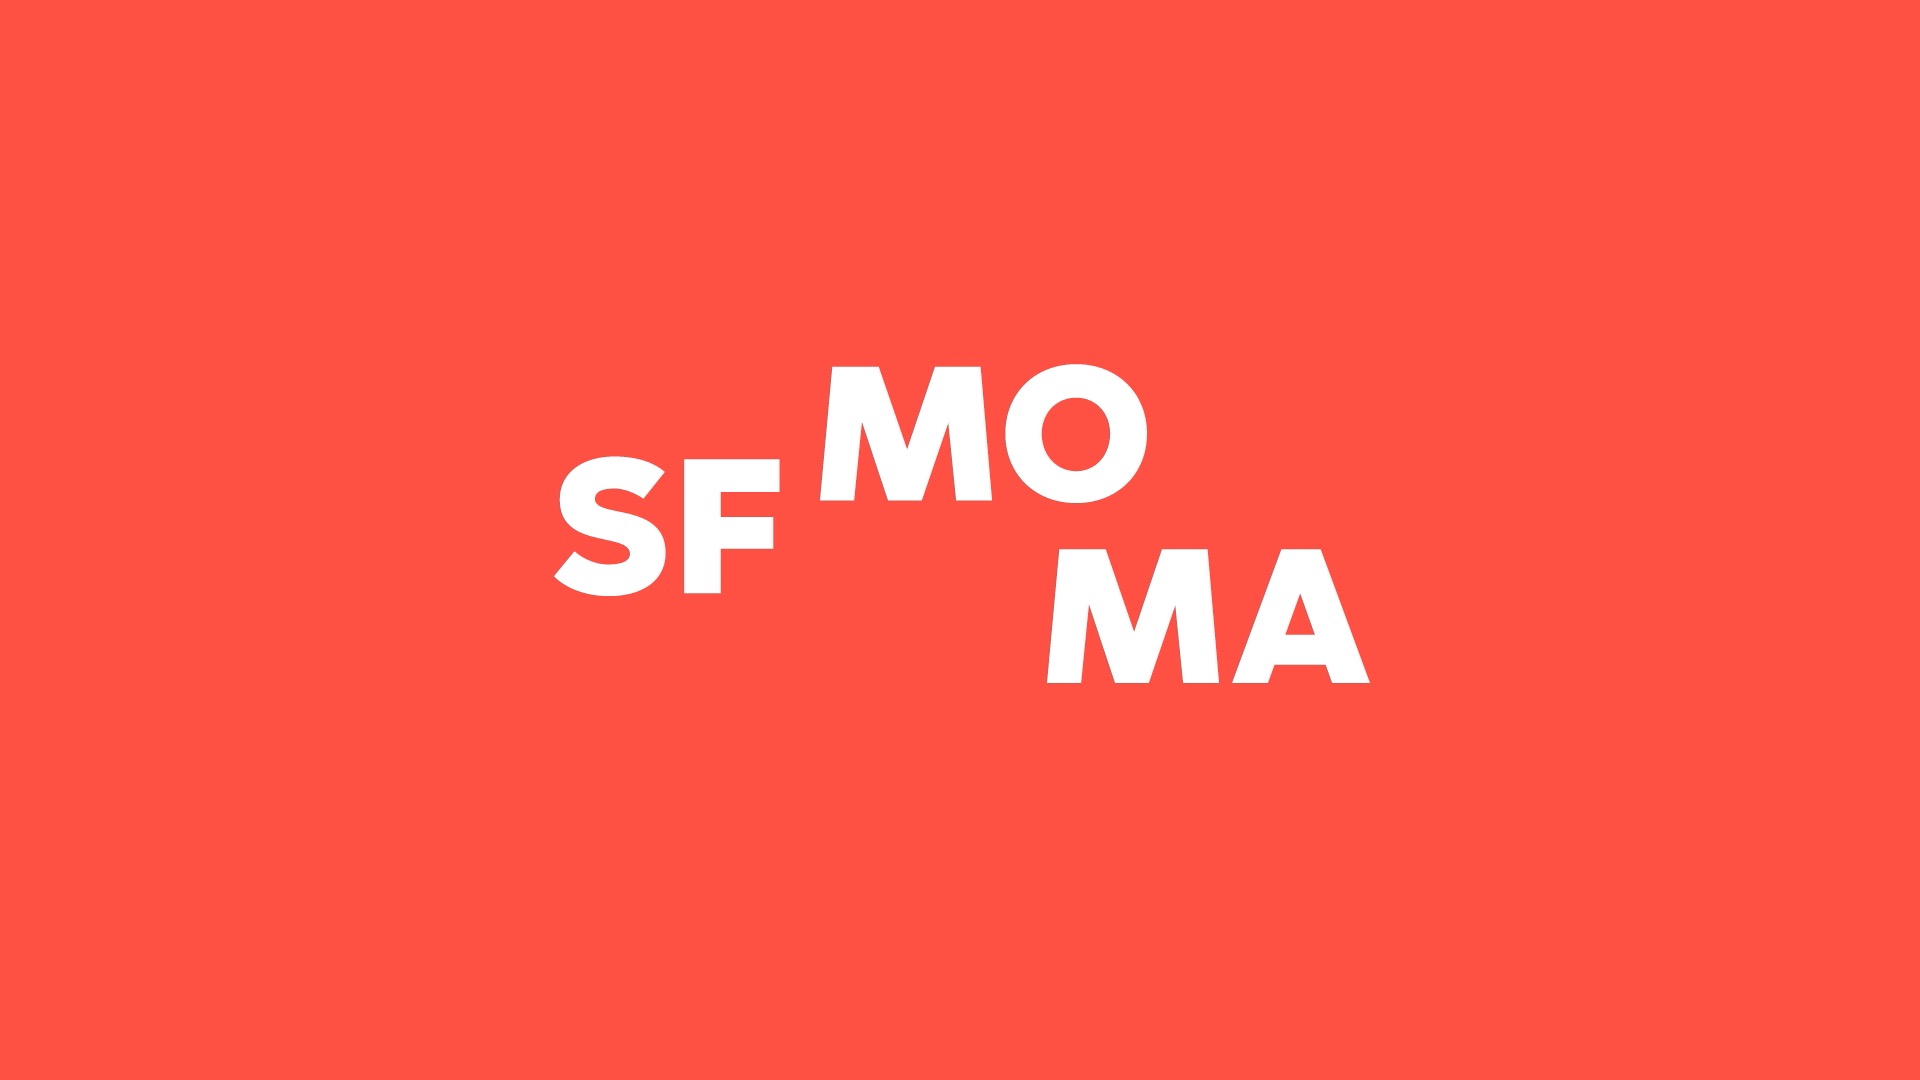 Font SFMOMA Text Offc